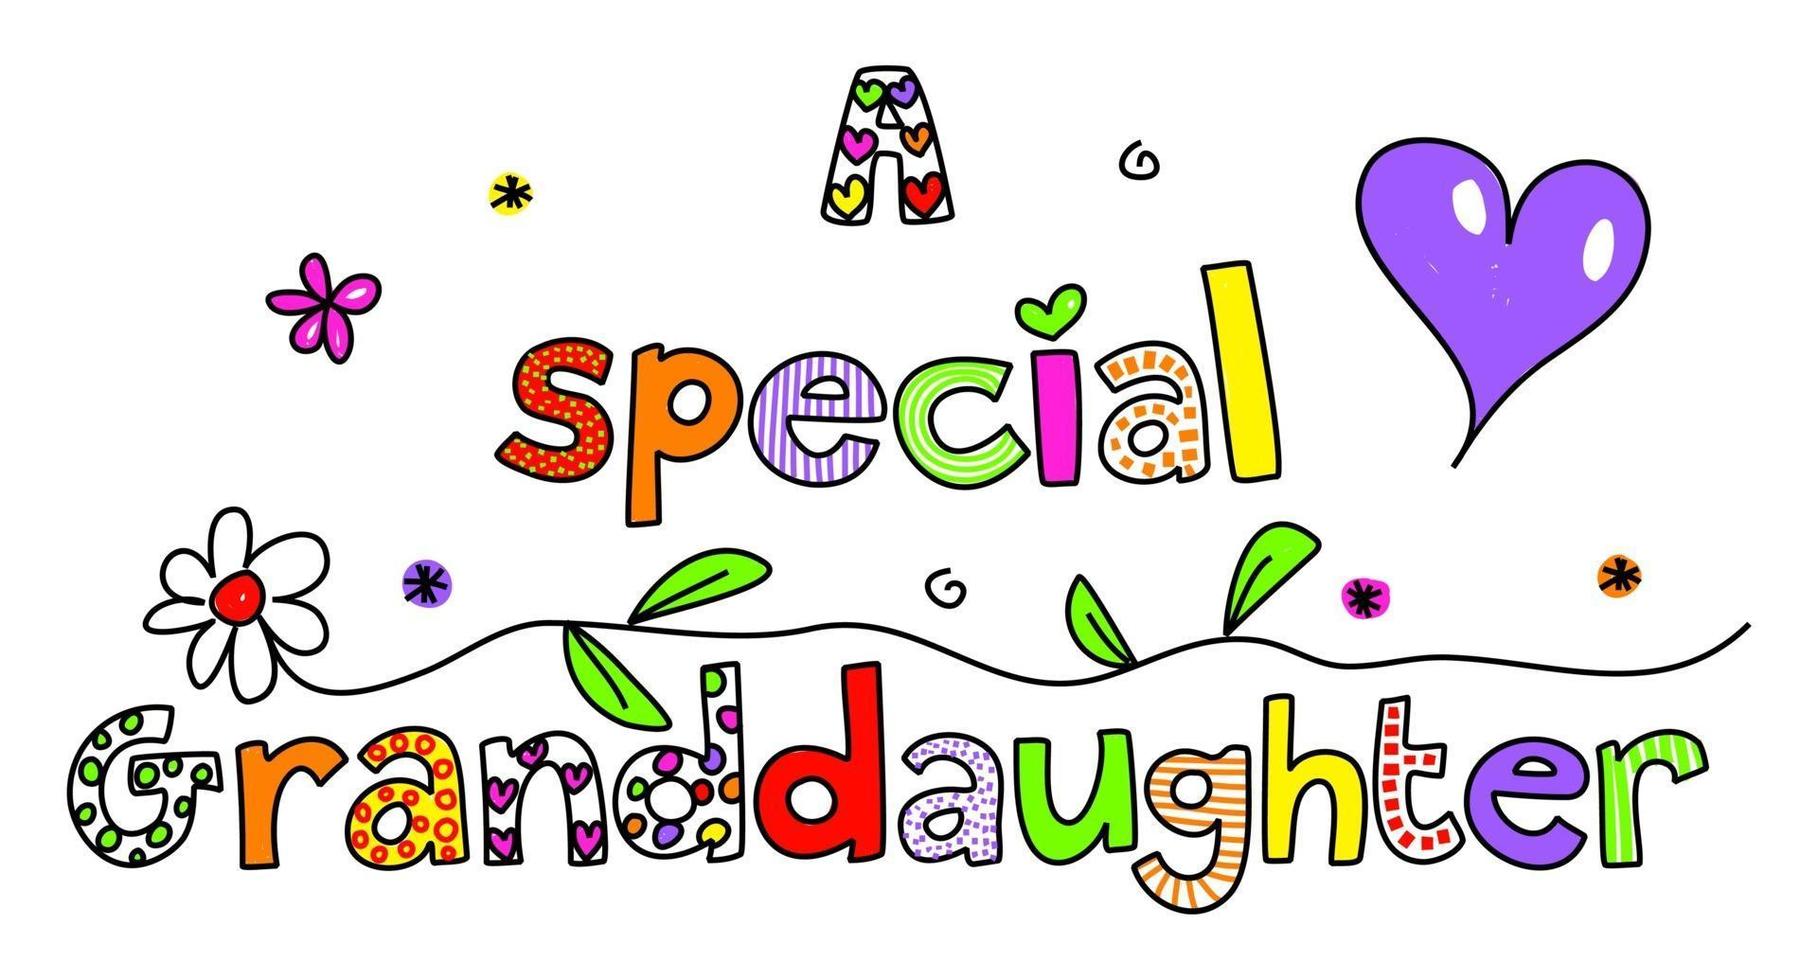 A Special Grand Daughter Text Message Greeting Title vector